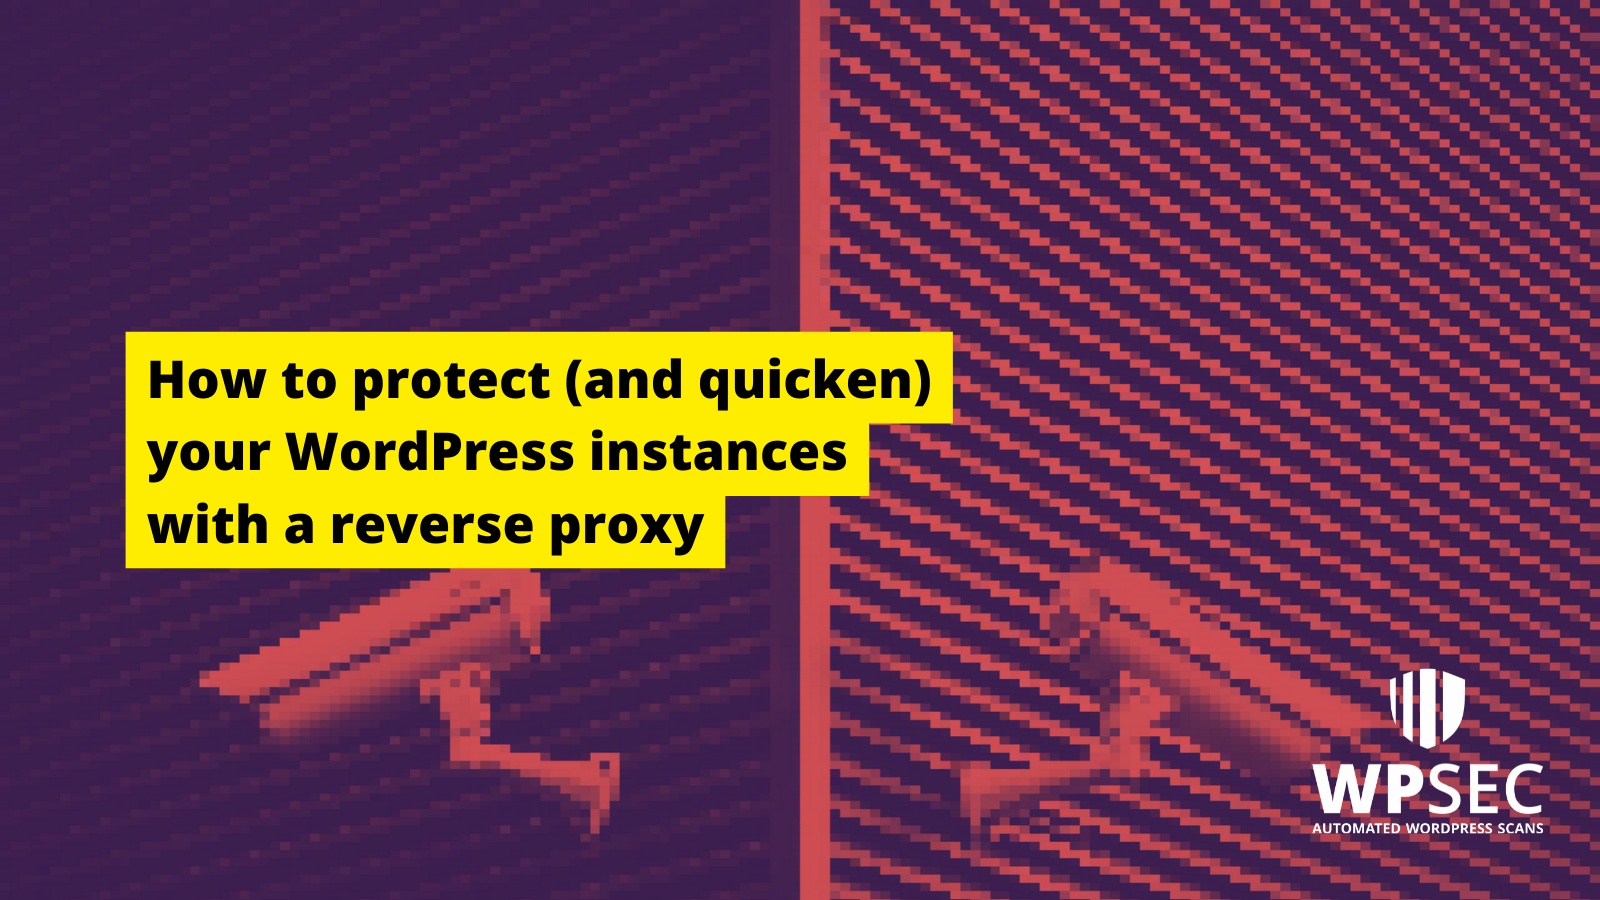 How to protect (and quicken) your WordPress instances with a reverse proxy